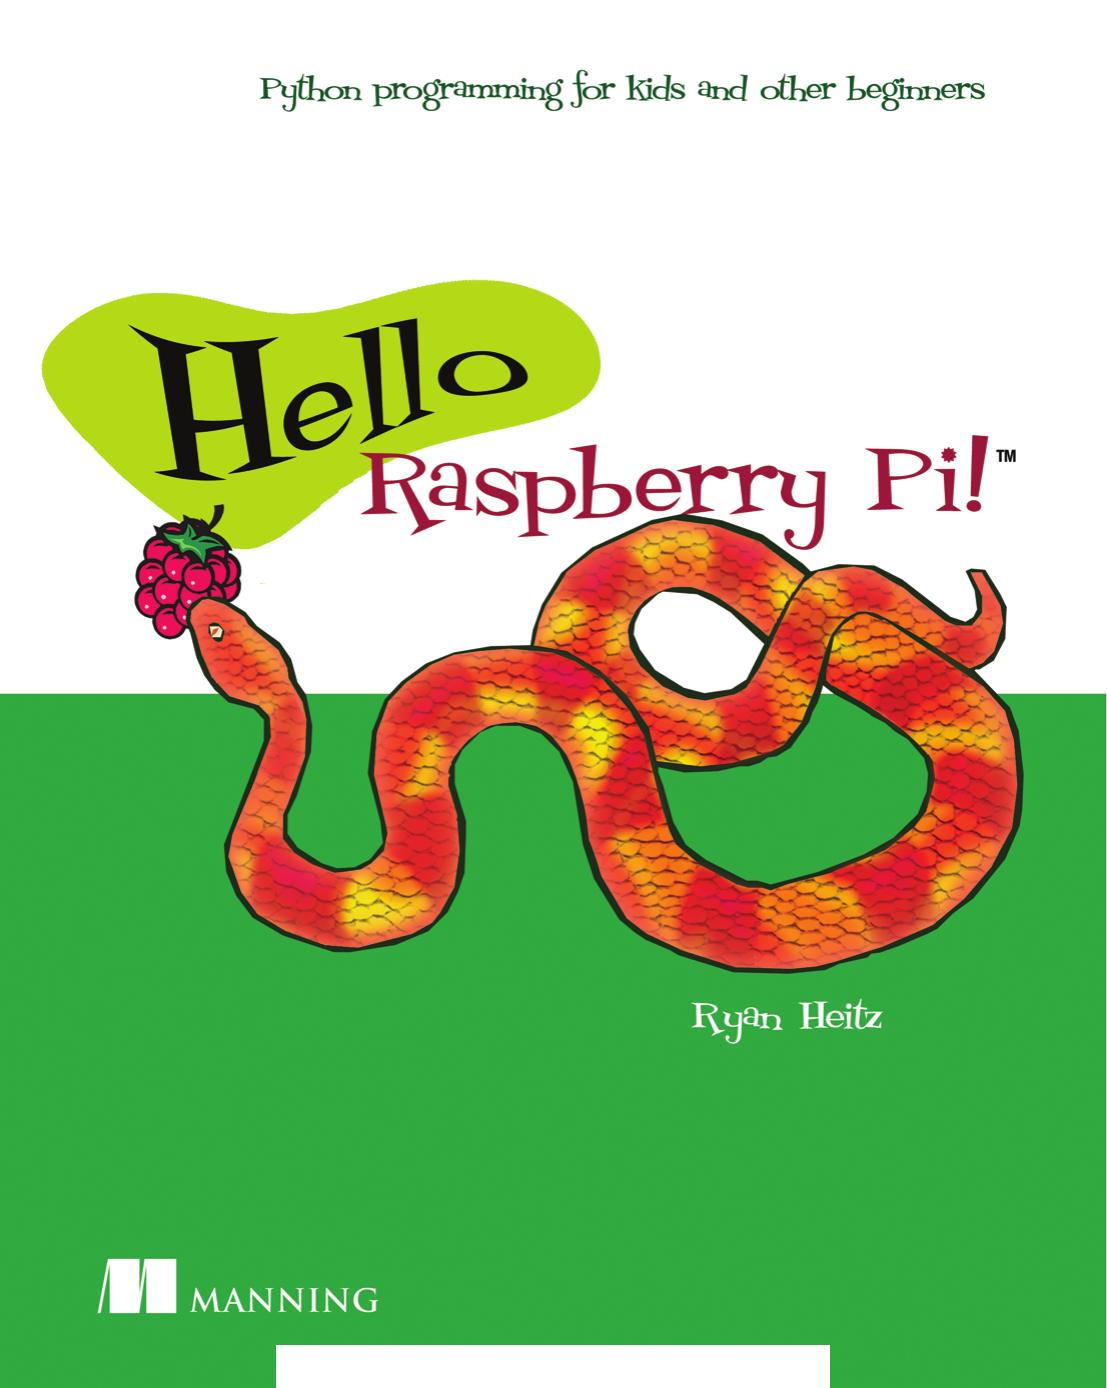 Hello Raspberry Pi!: Python programming for kids and other beginners by Ryan Heitz